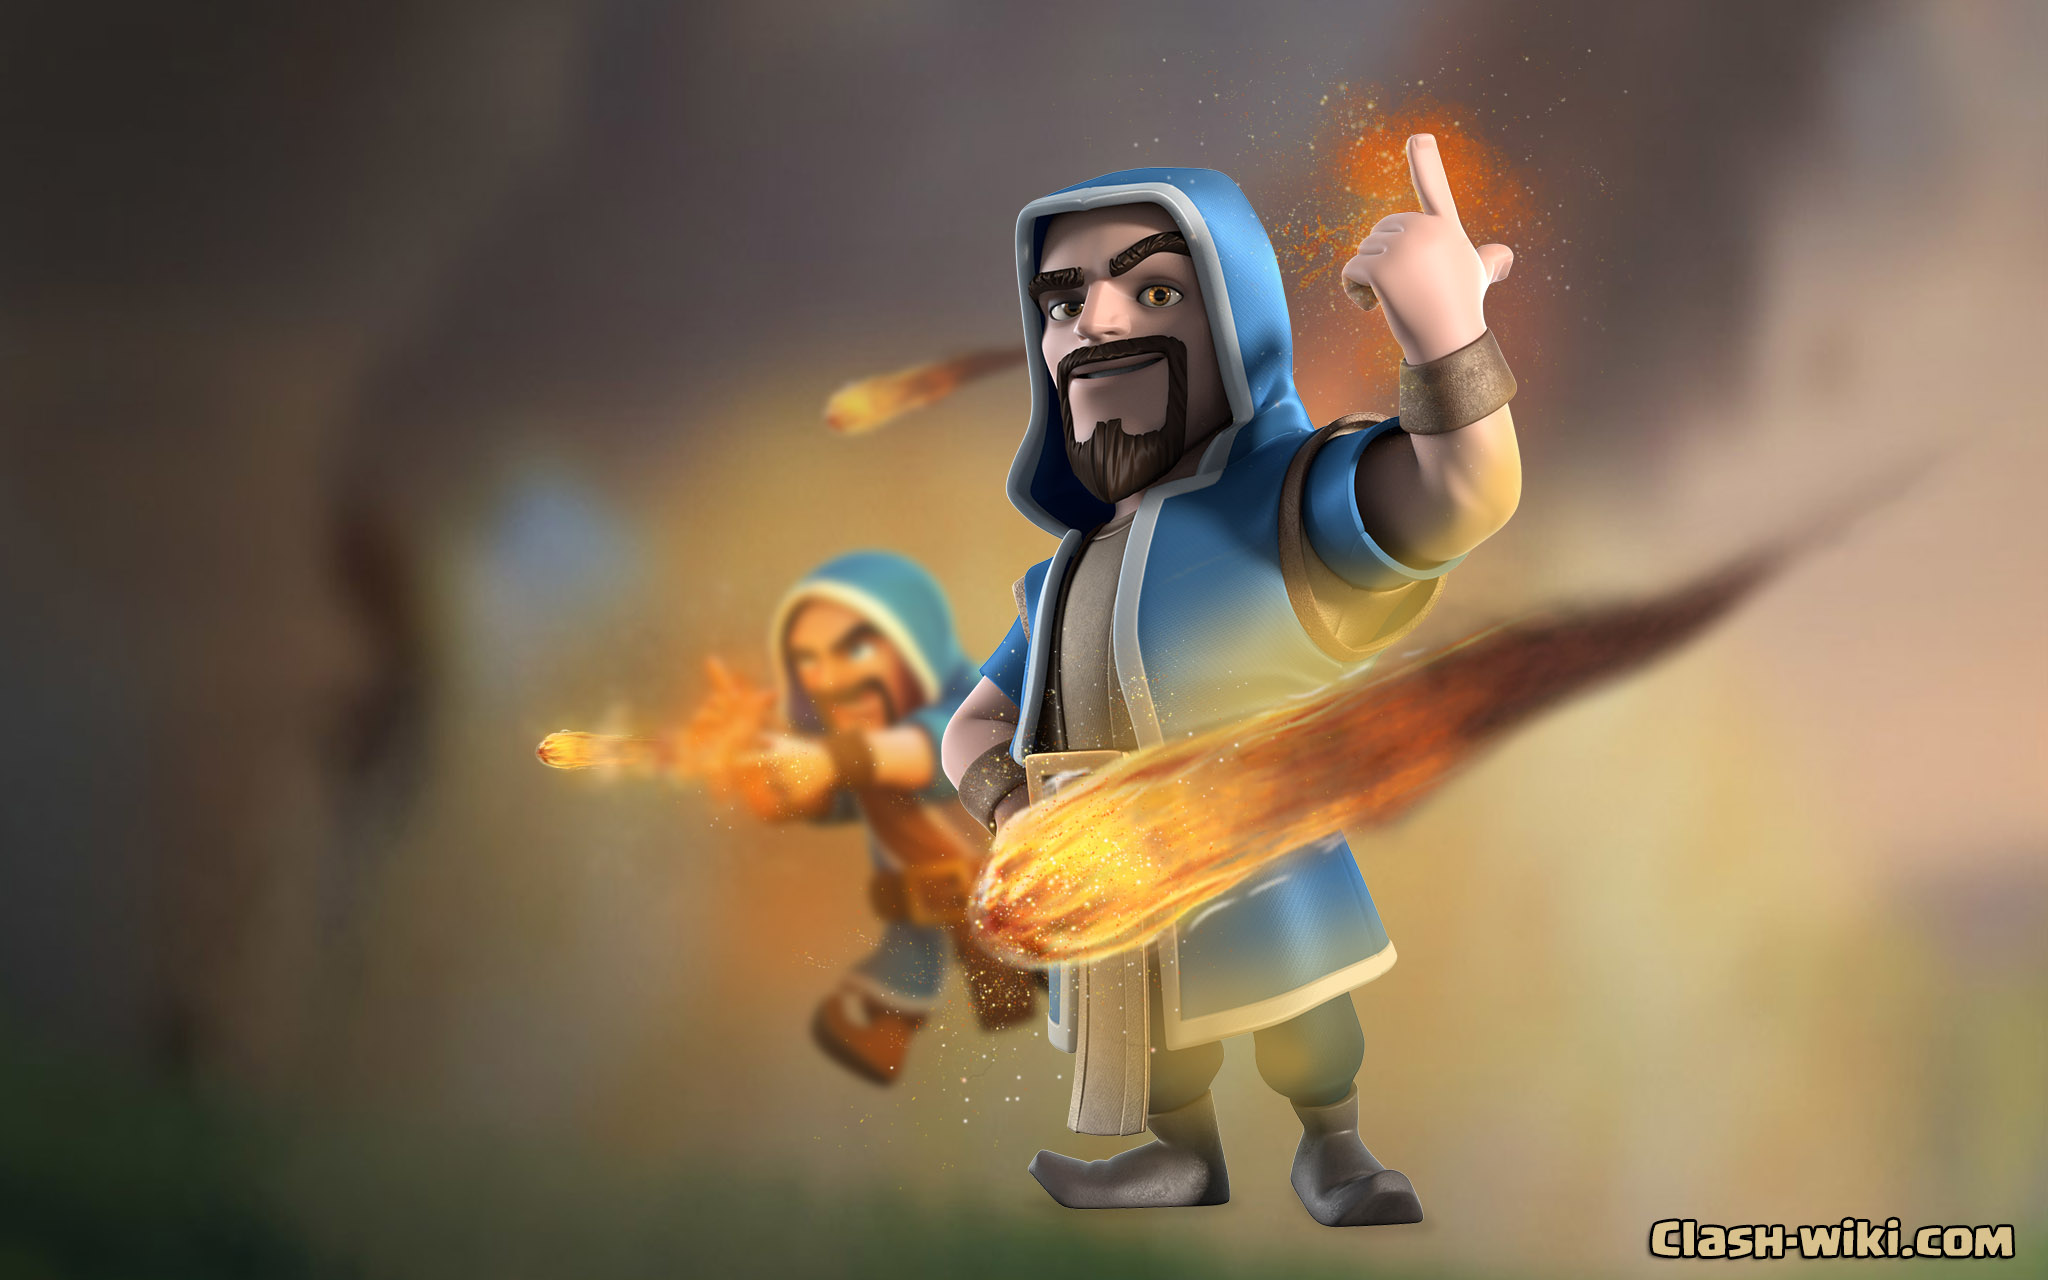 clash of clans wallpaper